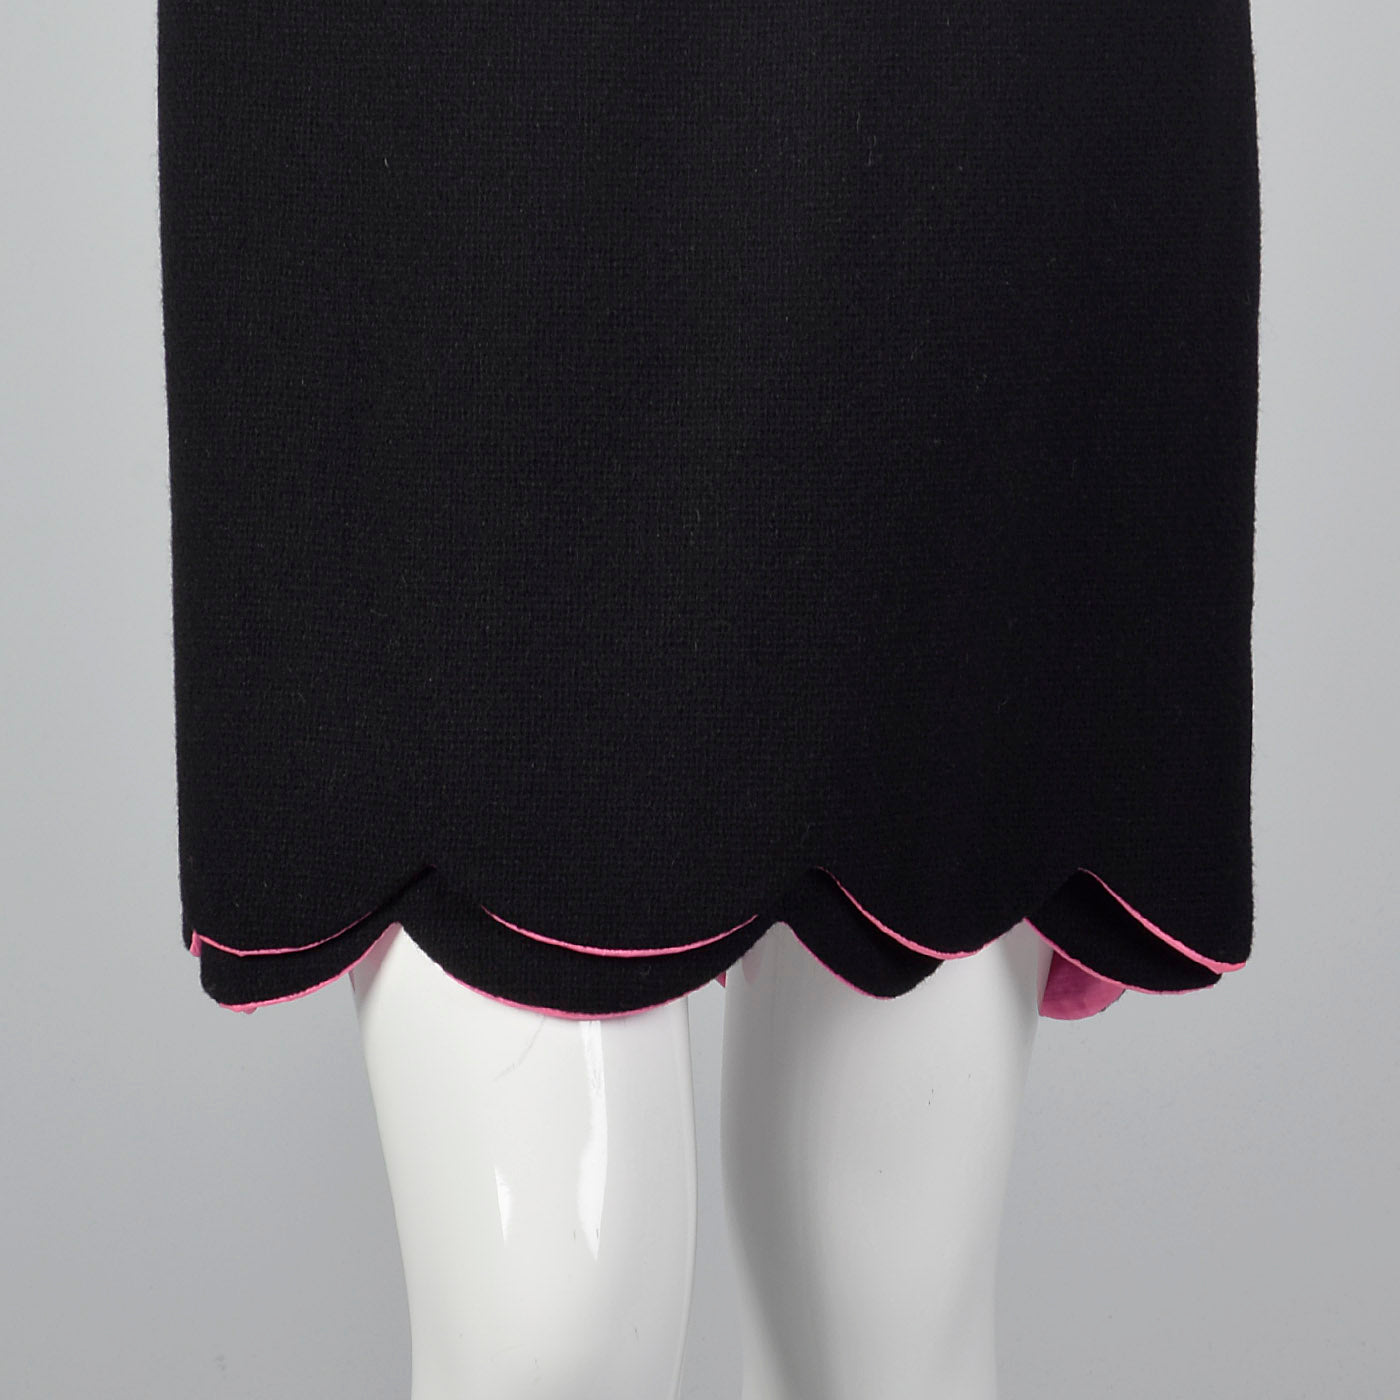 1960s Black Wool Dress with Pink Trim and Scallop Hem